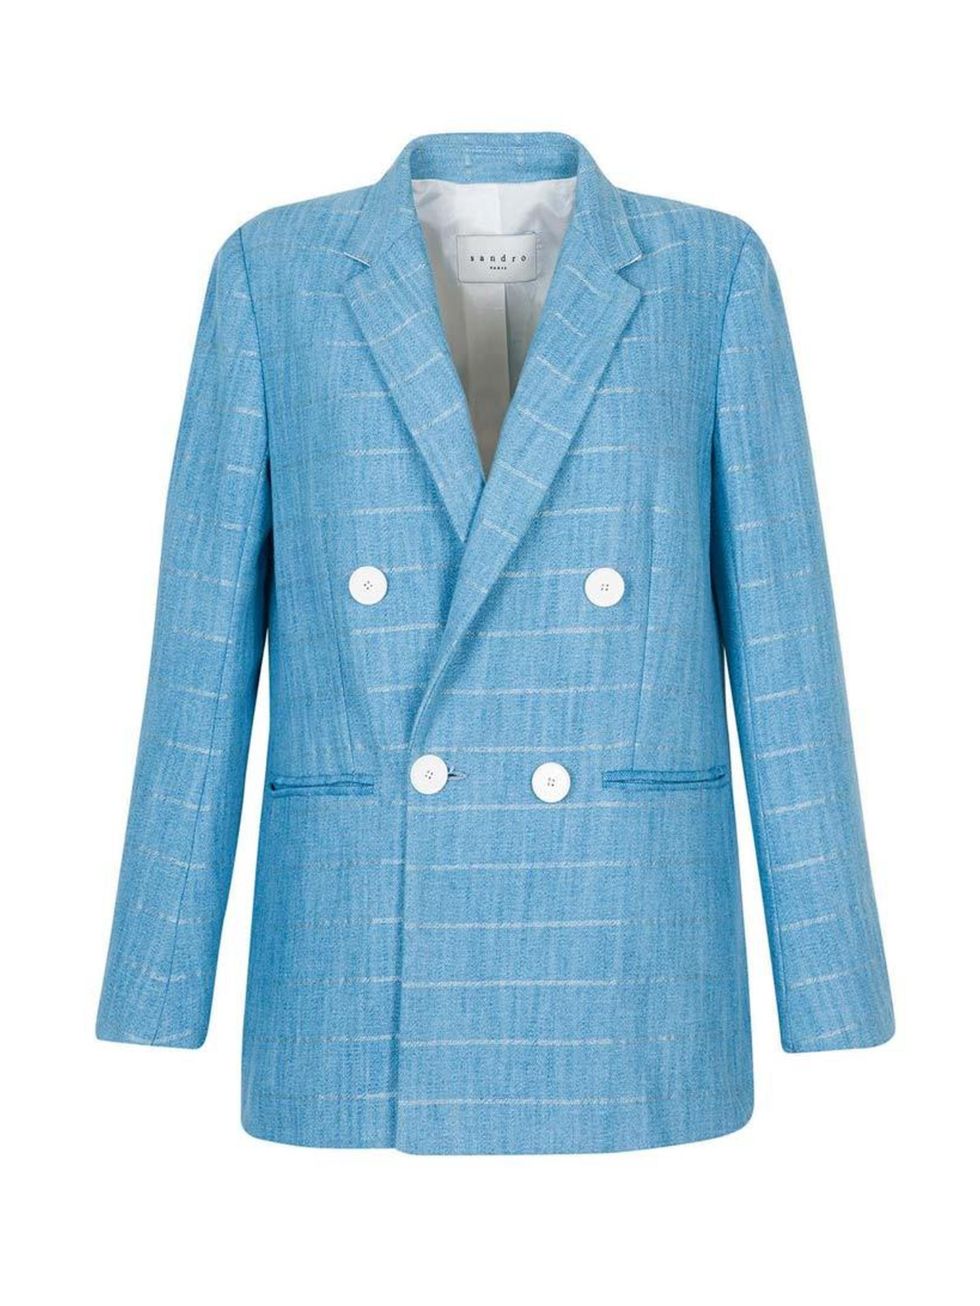 <p>Give this season's romantic blouse some structure by pairing with this double-breasted jacket.</p>

<p><a href="http://uk.sandro-paris.com/en/woman/jackets/violette-jacket/V6073E.html?dwvar_V6073E_color=47" target="_blank">Sandro</a> jacket, £315</p>